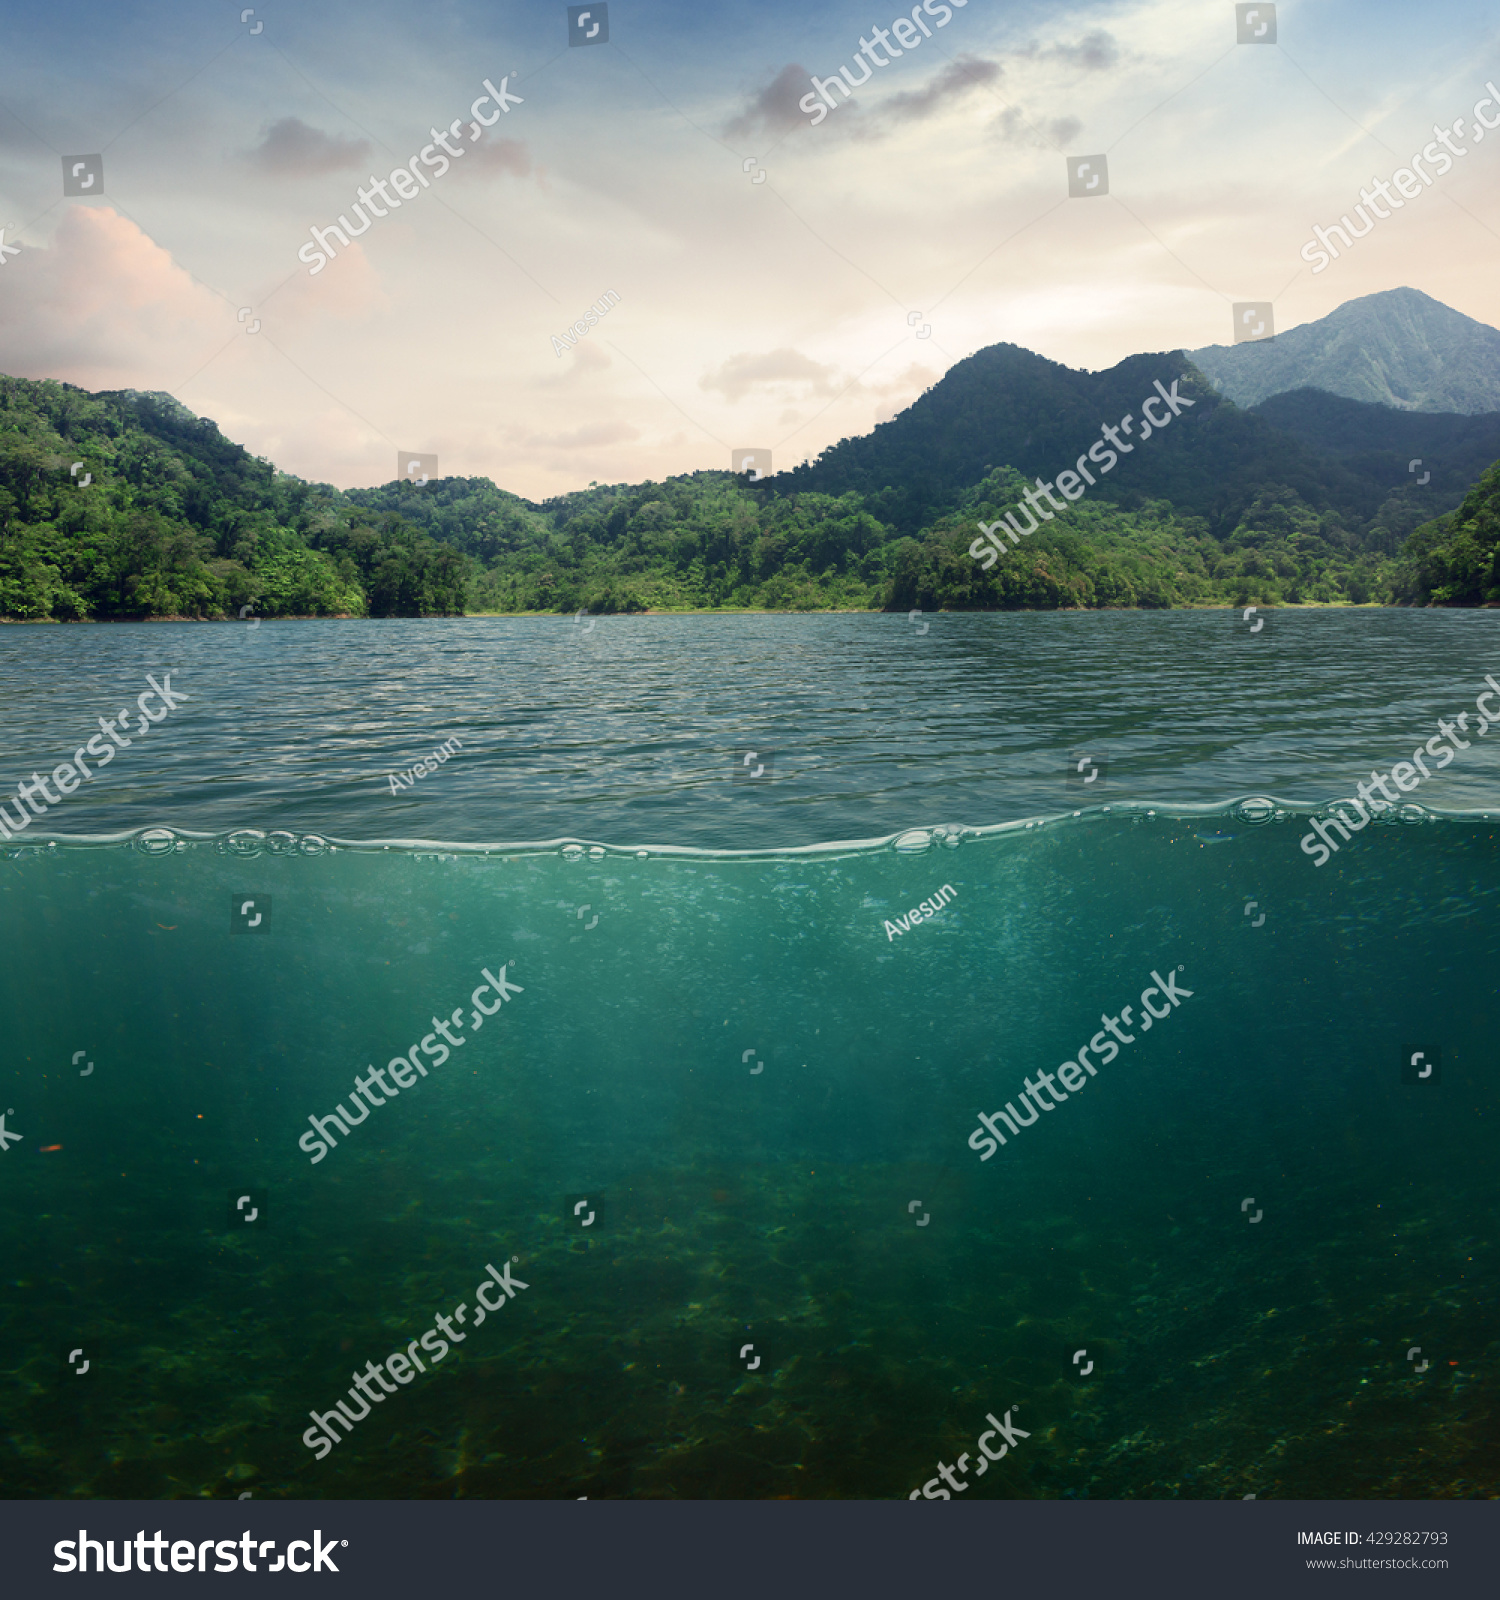 Sea landscape design template with underwater part and coast mountain splitted by waterline #429282793